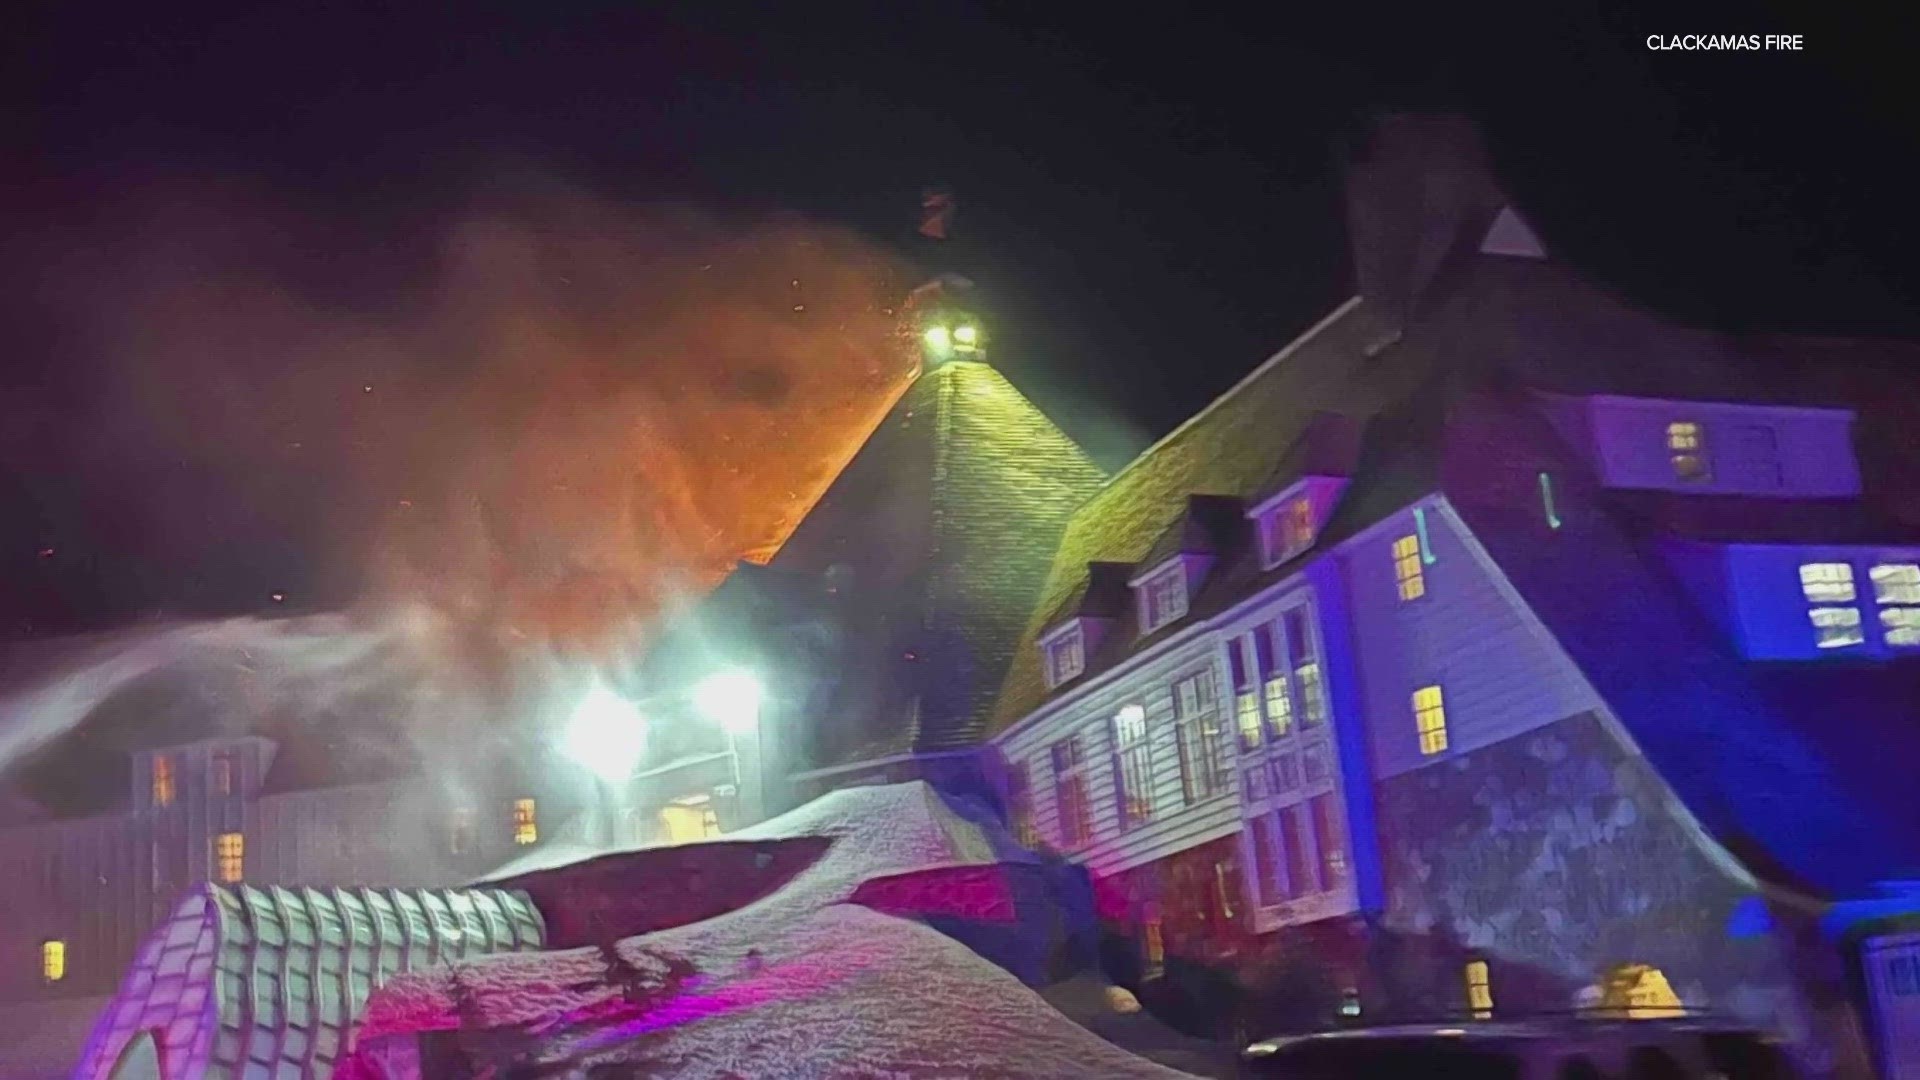 Timberline Lodge is closed after an overnight attic fire.  Nobody was injured.